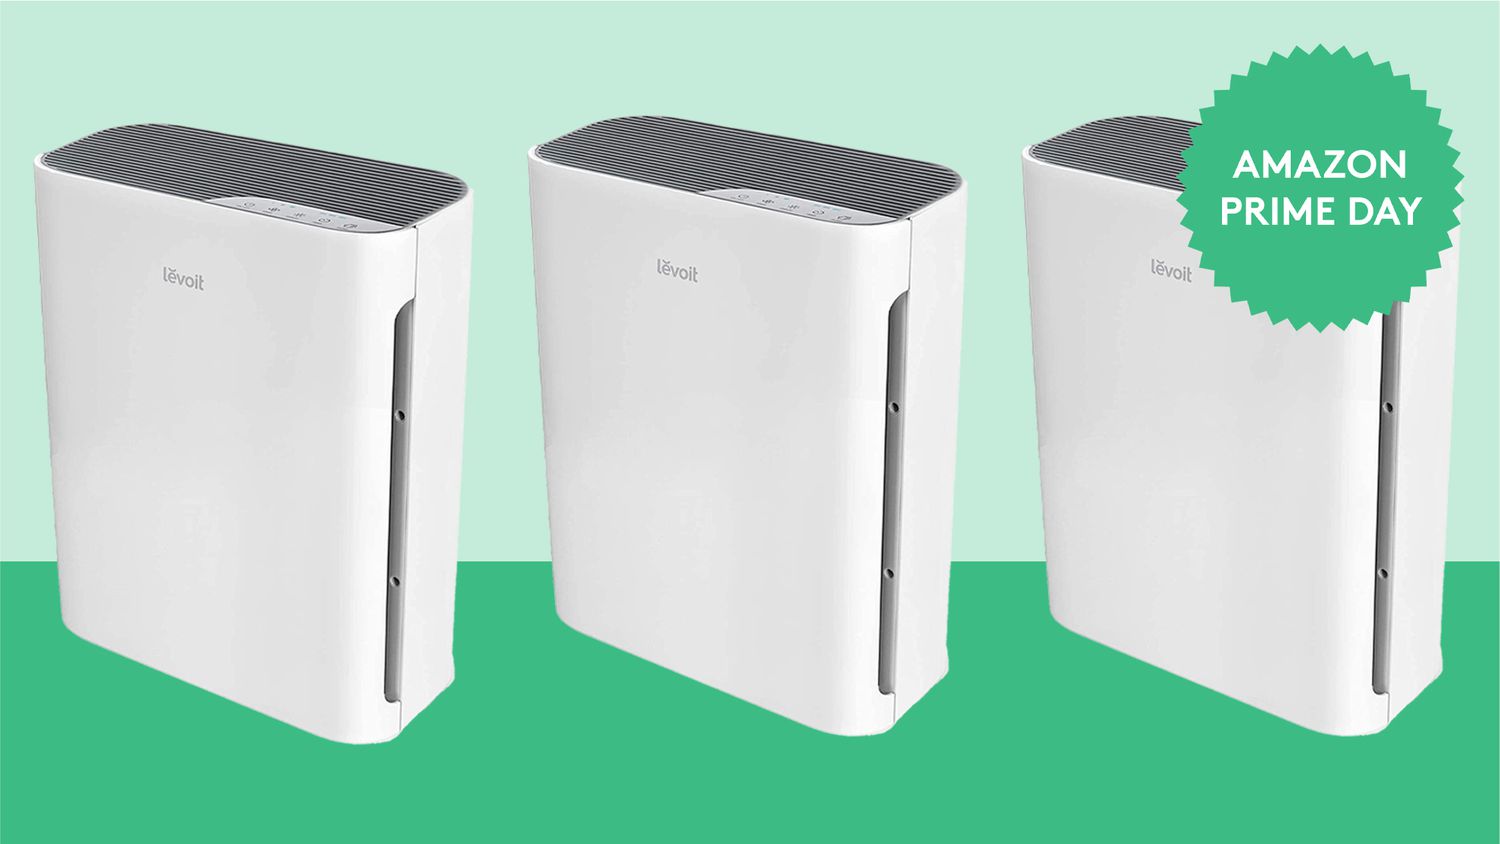 Air Purifiers for Home